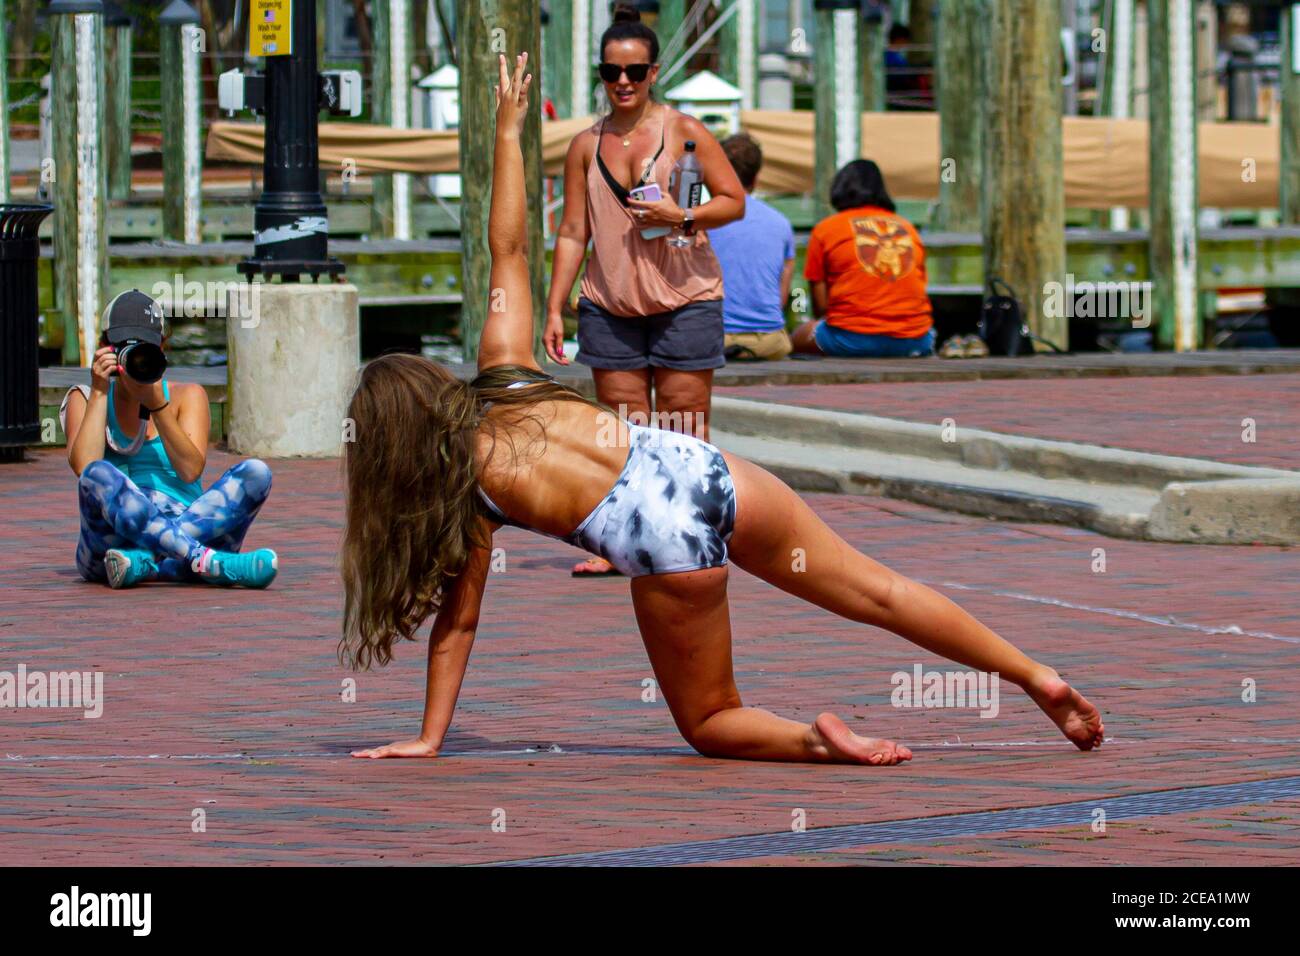 Annapolis, MD 08/21/2020: A teen gymnast girl in swimsuit  is posing to a professional photographer on cobblestone ground of Annapolis Marina  Mother Stock Photo